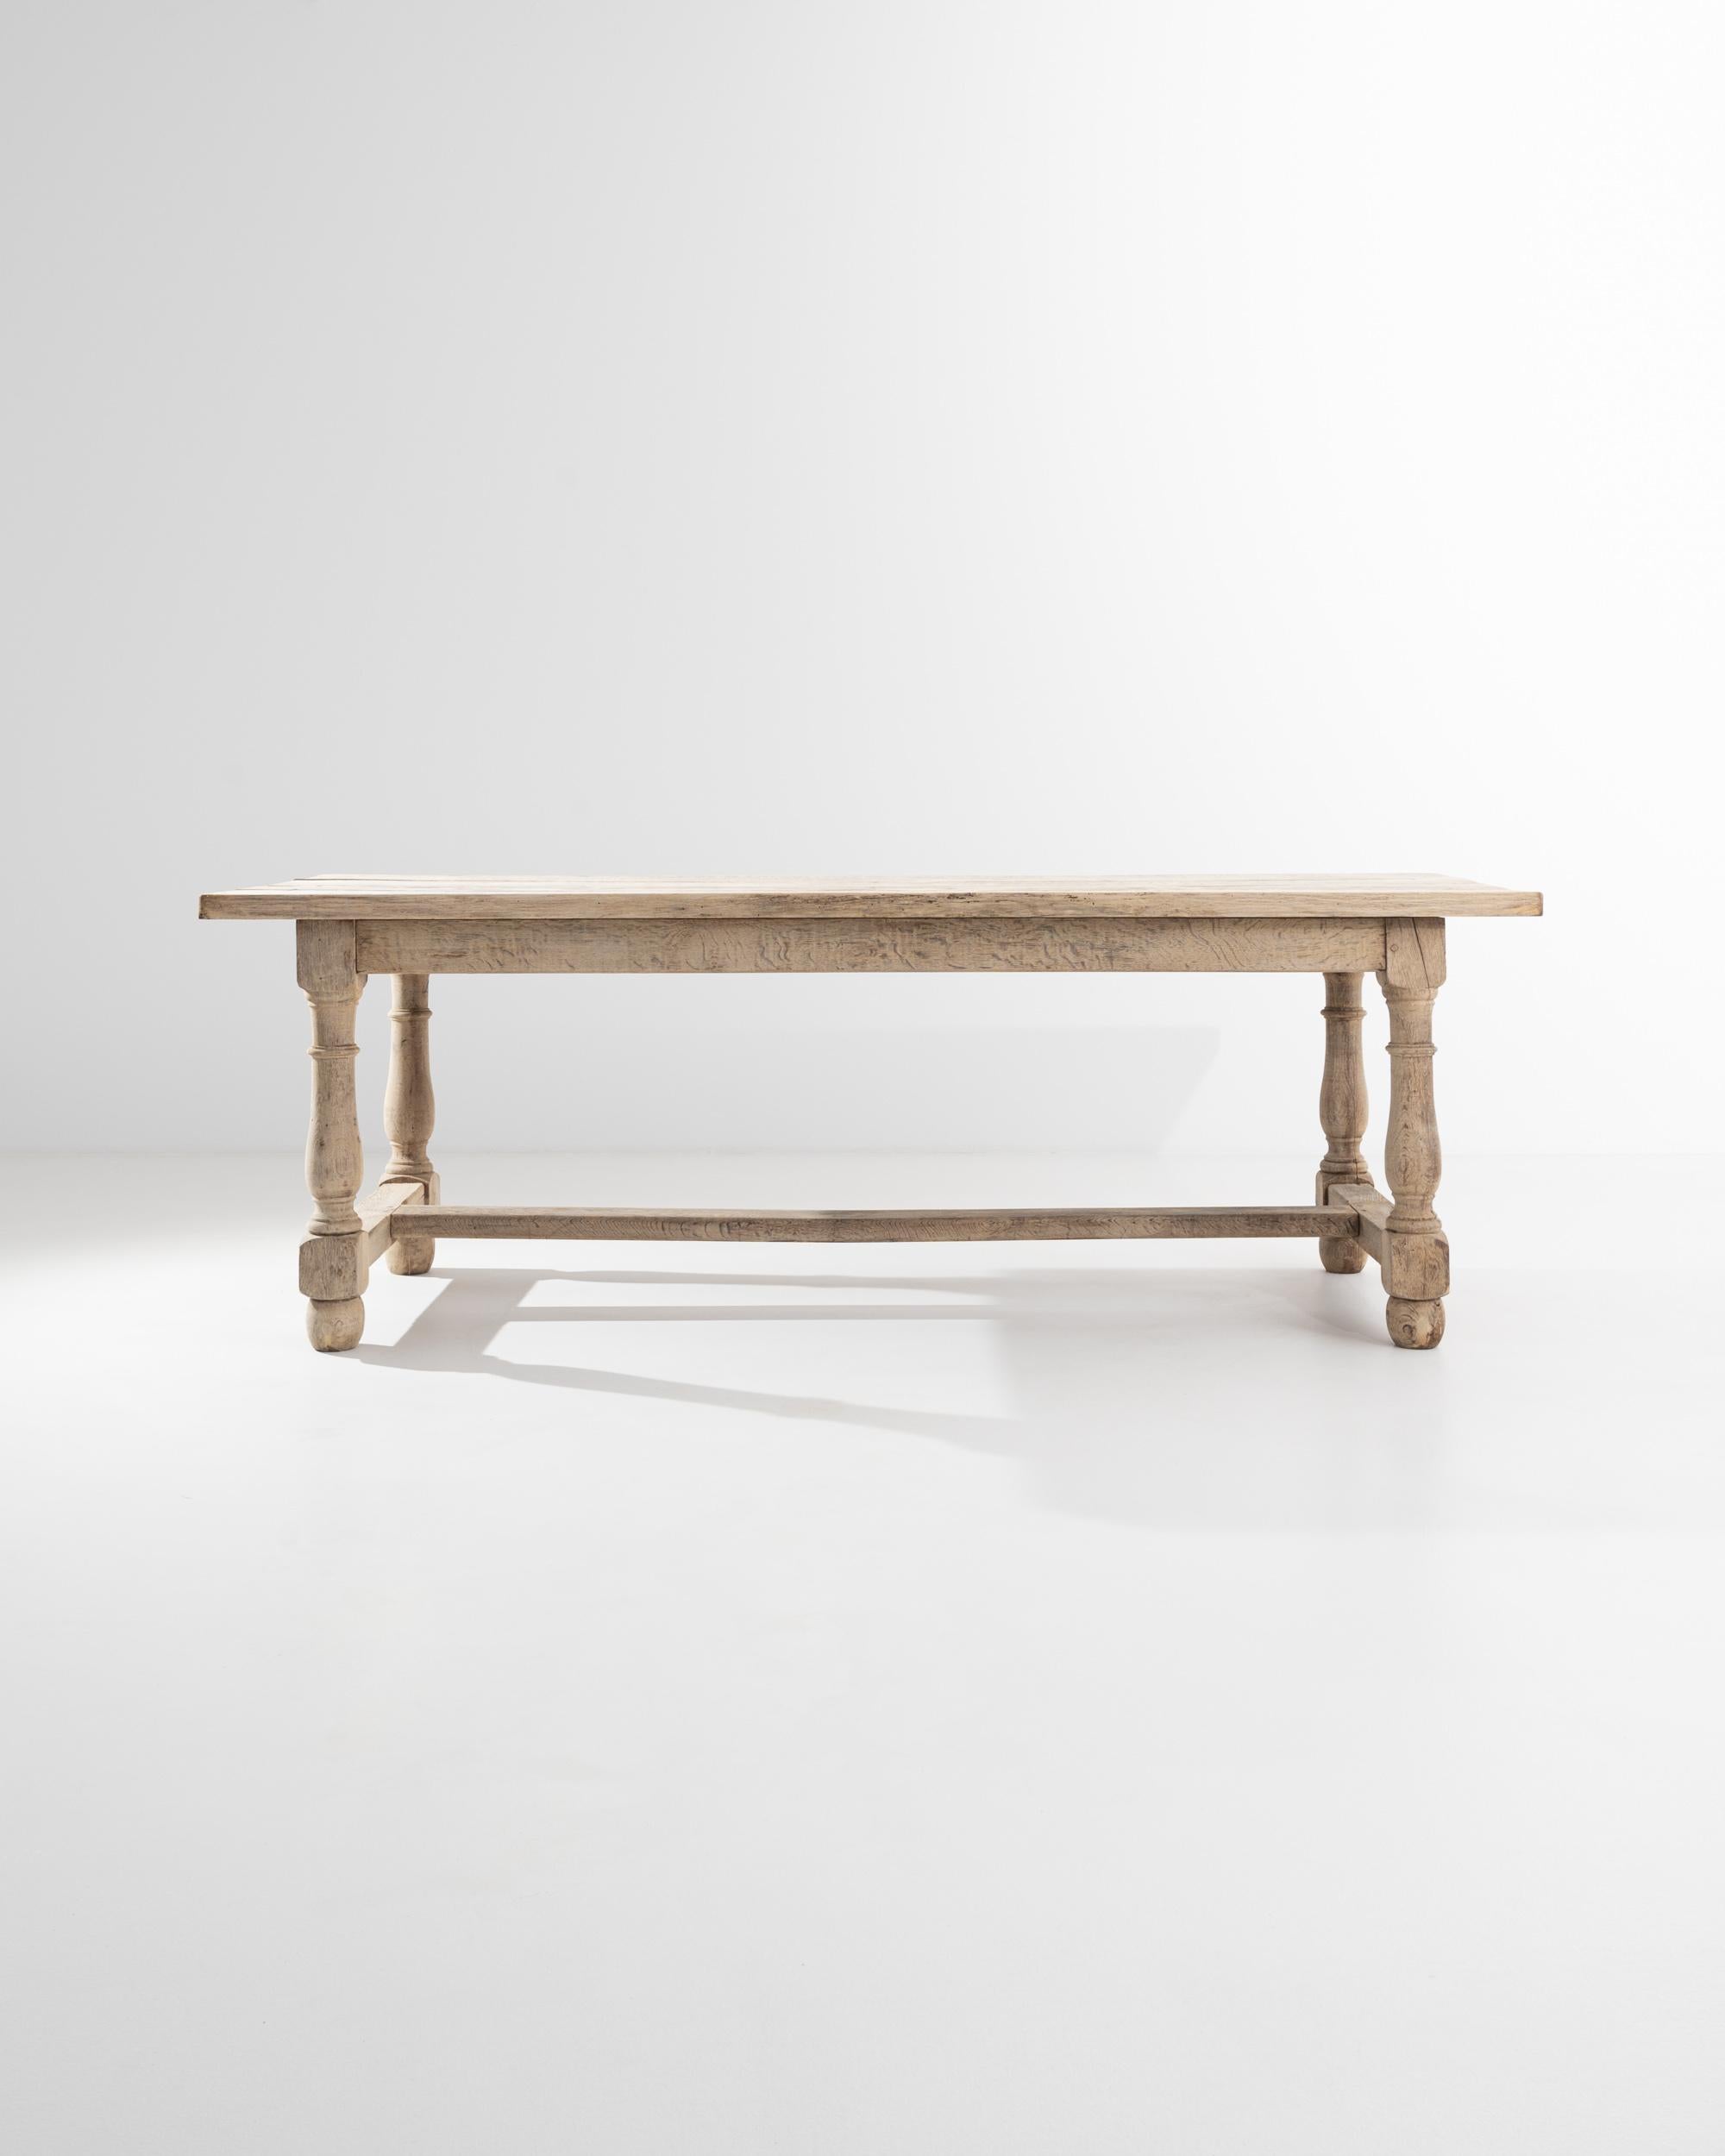 A wooden dining table from the 20th century. Natural stripes of wood grain flow gracefully along the expansive, time-touched planks that compose the top and conjoining structures of this elegant dining table. Its construction is forthright and